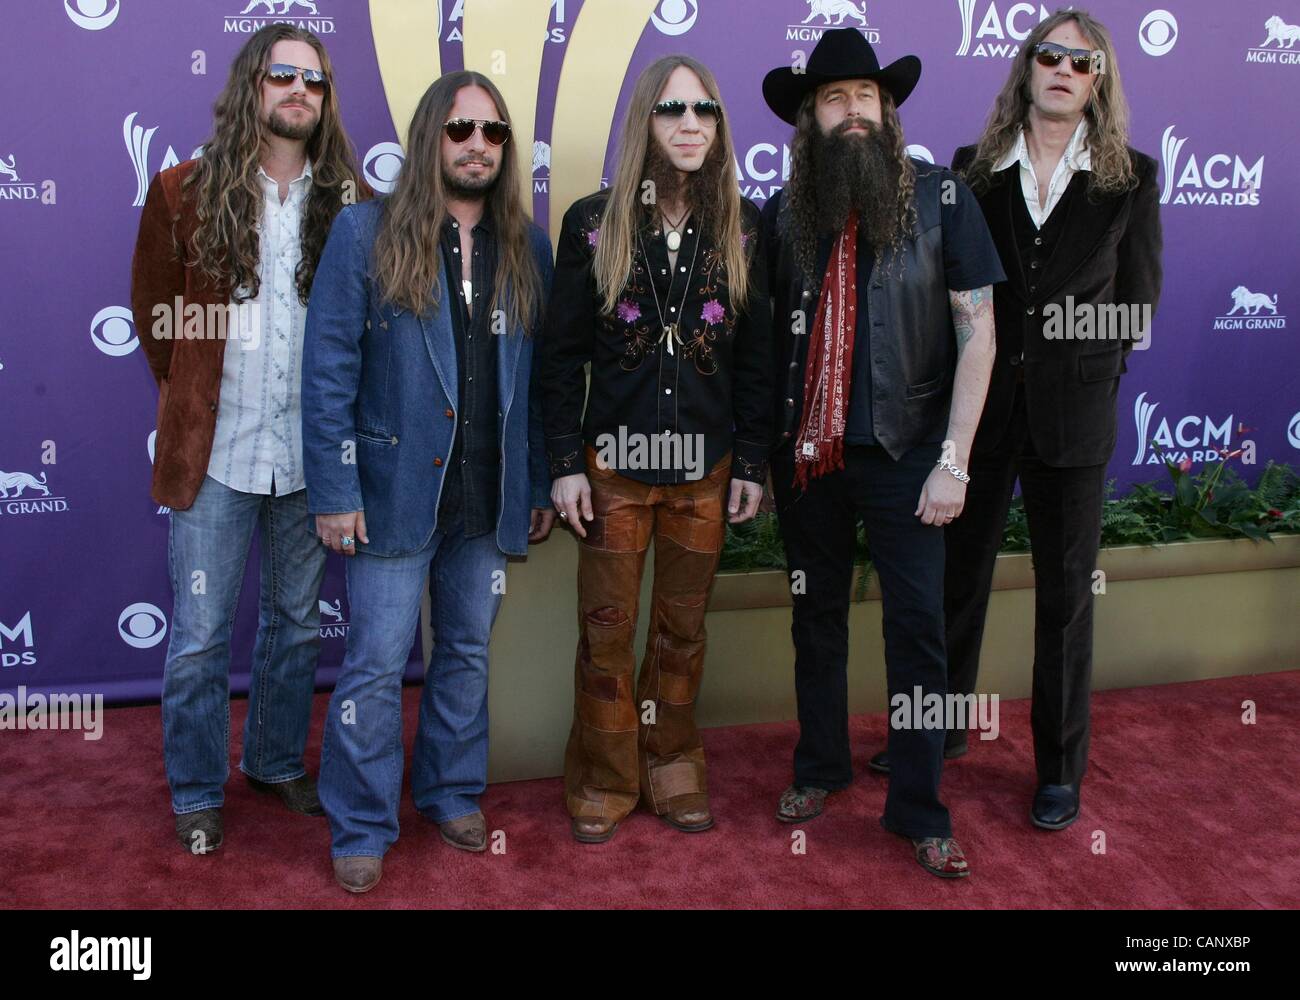 Brandon Still, Paul Jackson, Charlie Starr, Brit Turner, Richard Turner of Blackberry Smoke at arrivals for 47th Annual Academy of Country Music (ACM) Awards - ARRIVALS 2, MGM Grand Garden Arena, Las Vegas, NV April 1, 2012. Photo By: James Atoa/Everett Collection Stock Photo